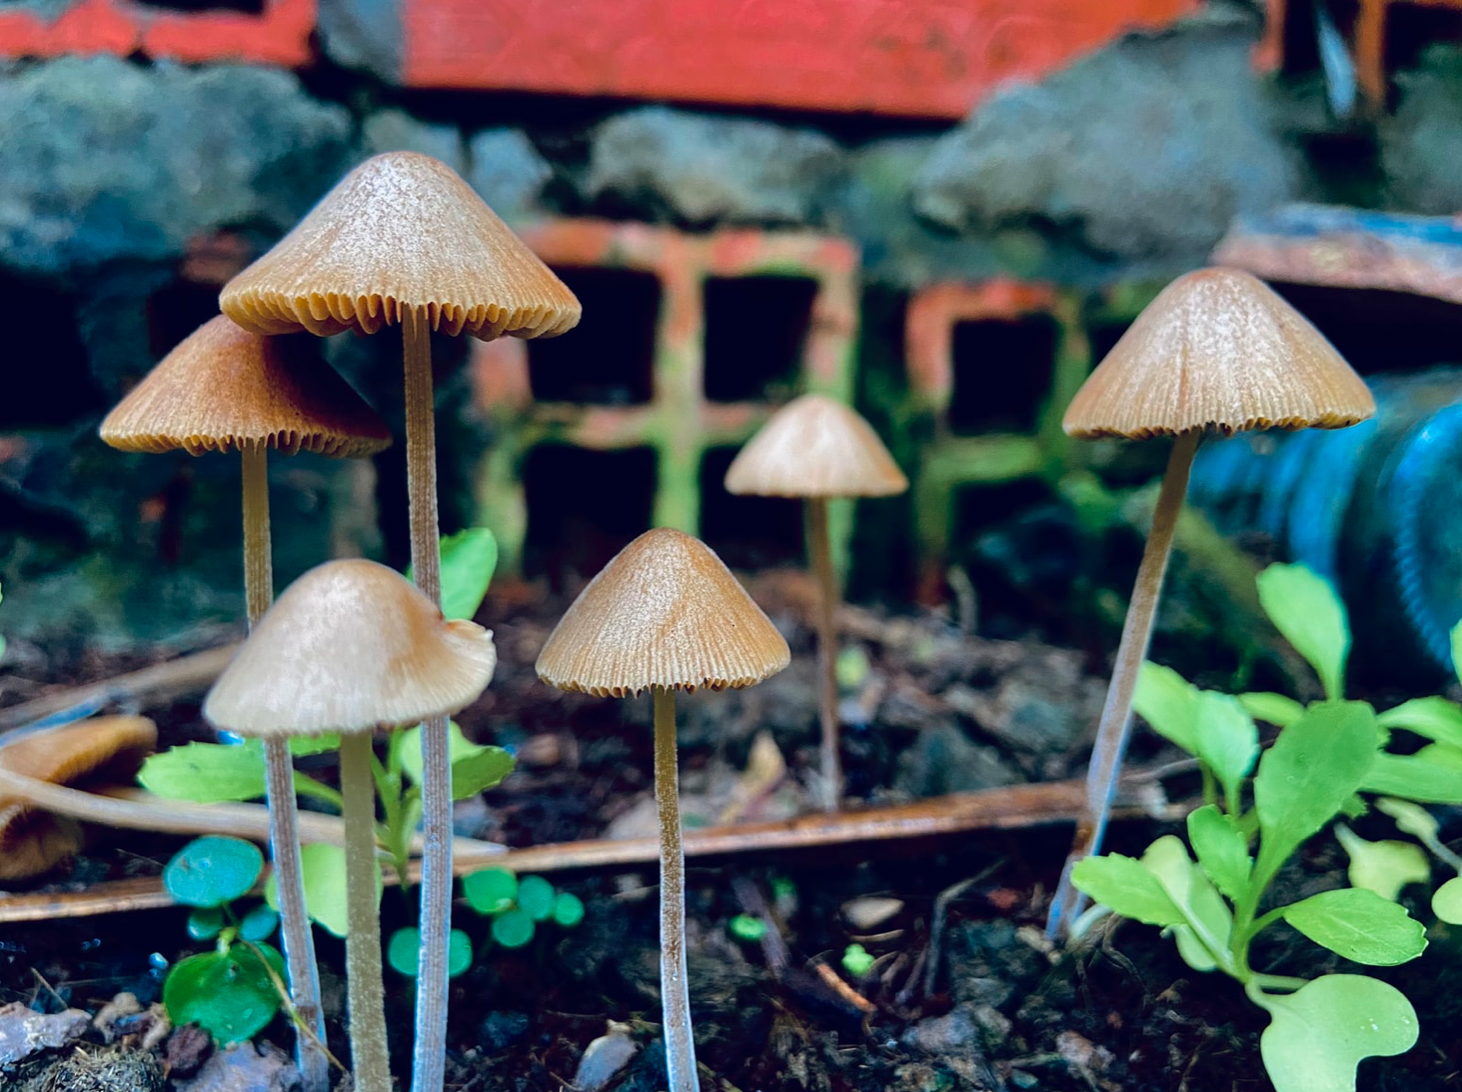 How To Grow Edible Mushrooms at Home